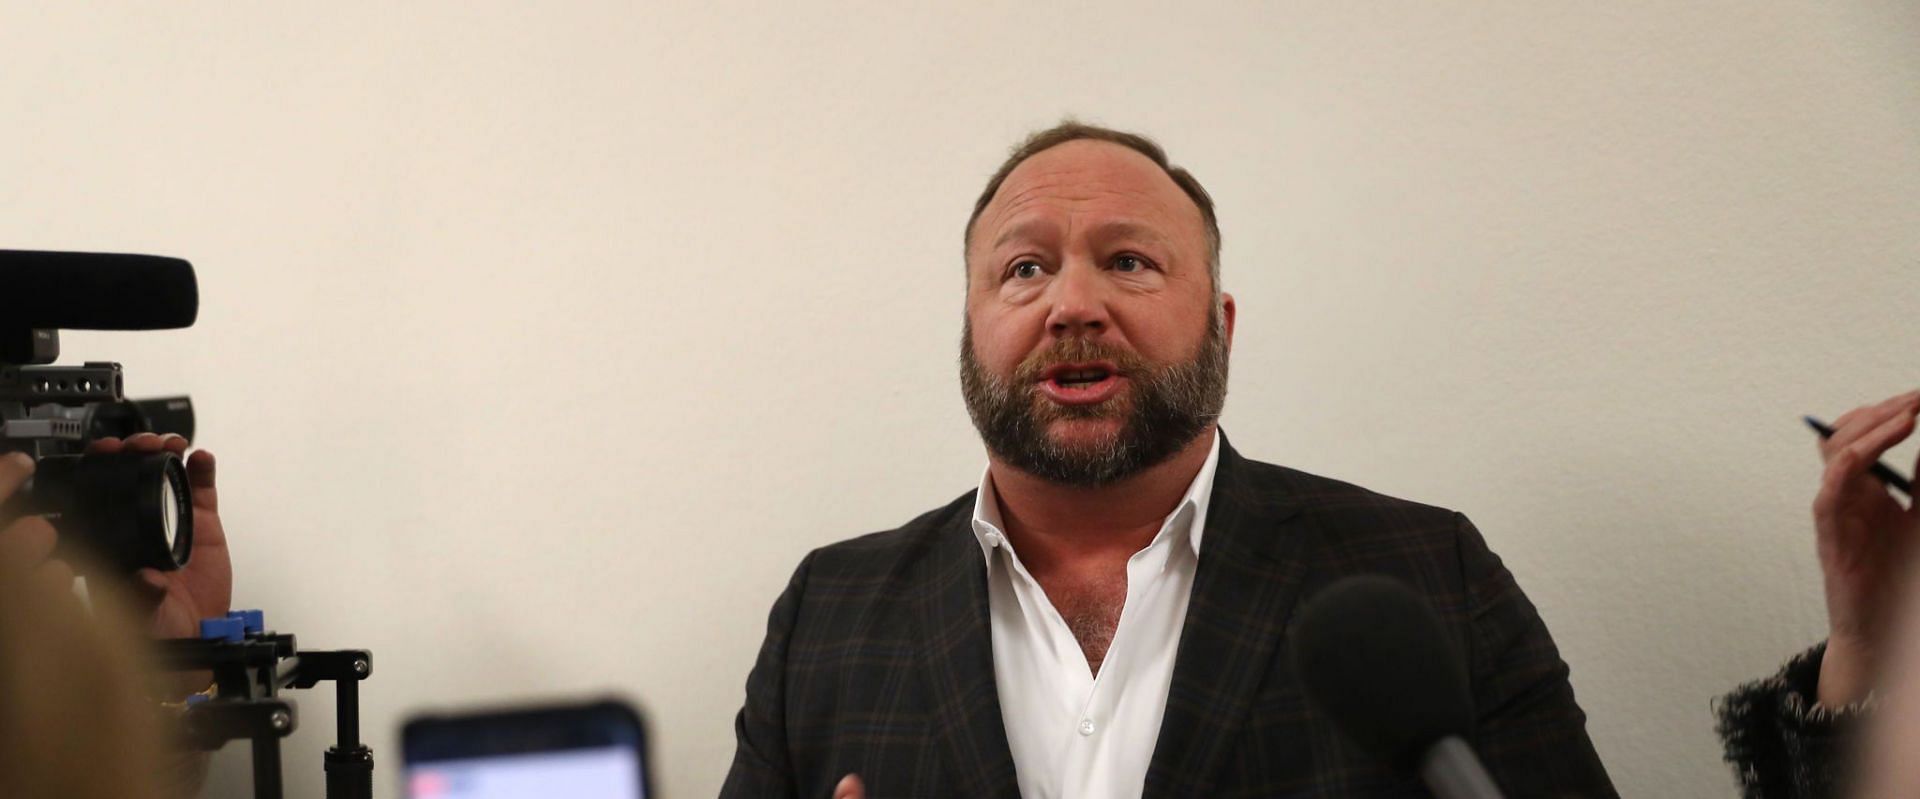 Legal experts said Alex Jones can face perjury if prosecutors decide to file a criminal case against him (Image via Getty Images)